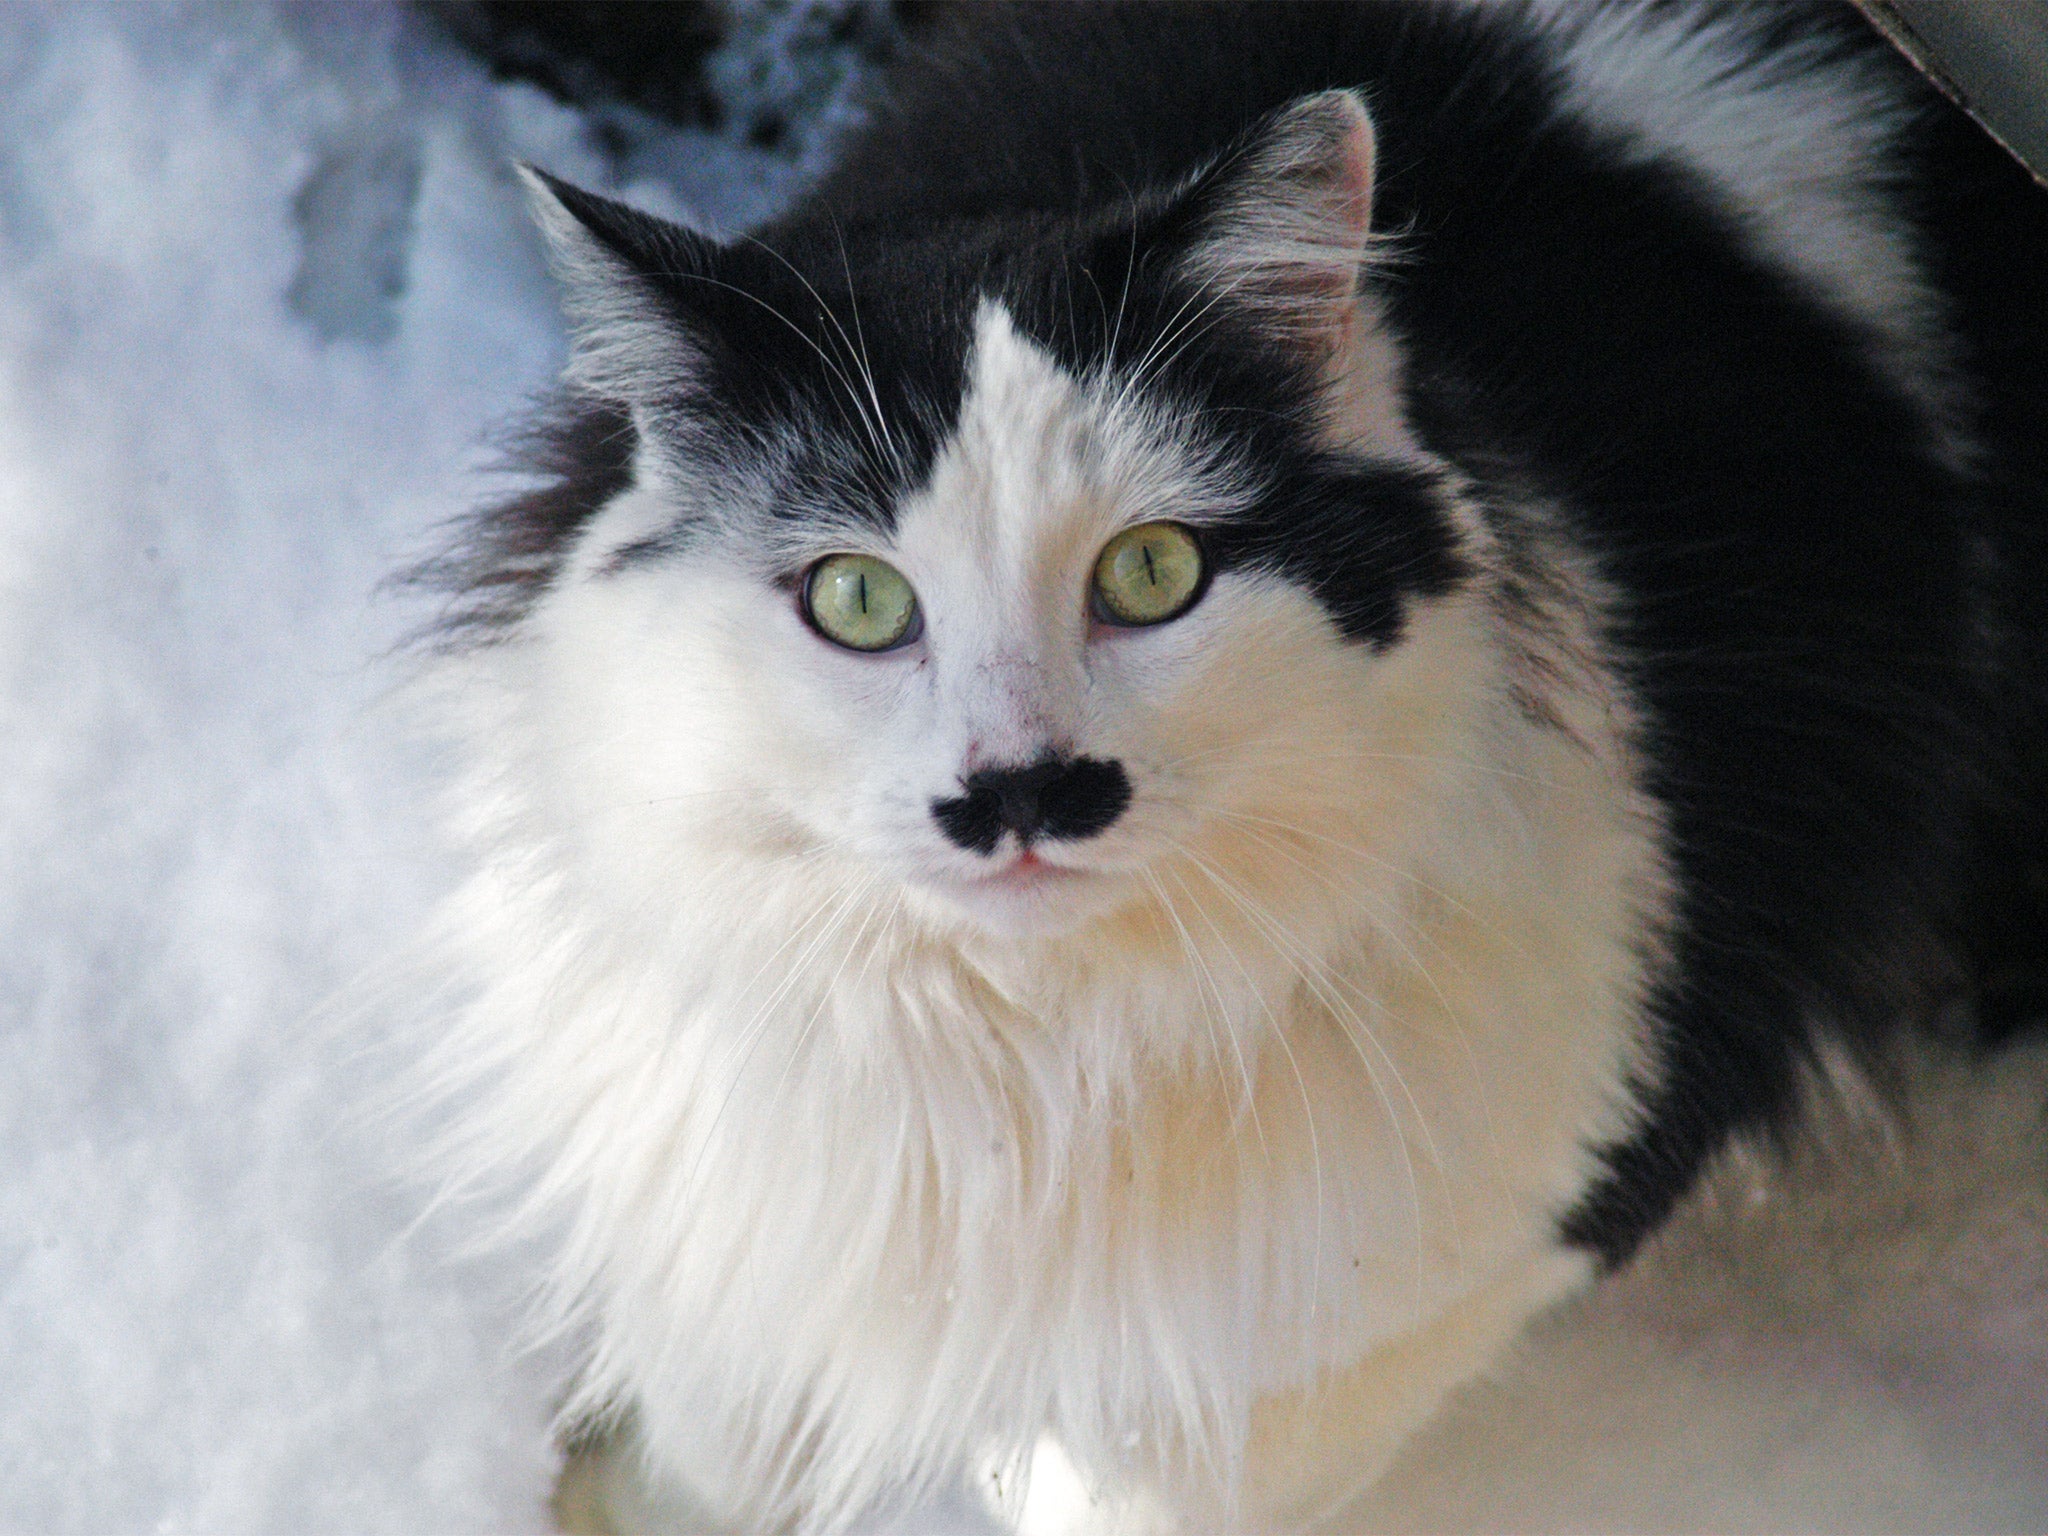 Cats with black markings under their nose have been called ‘Hitler cats’ or ‘kitlers’